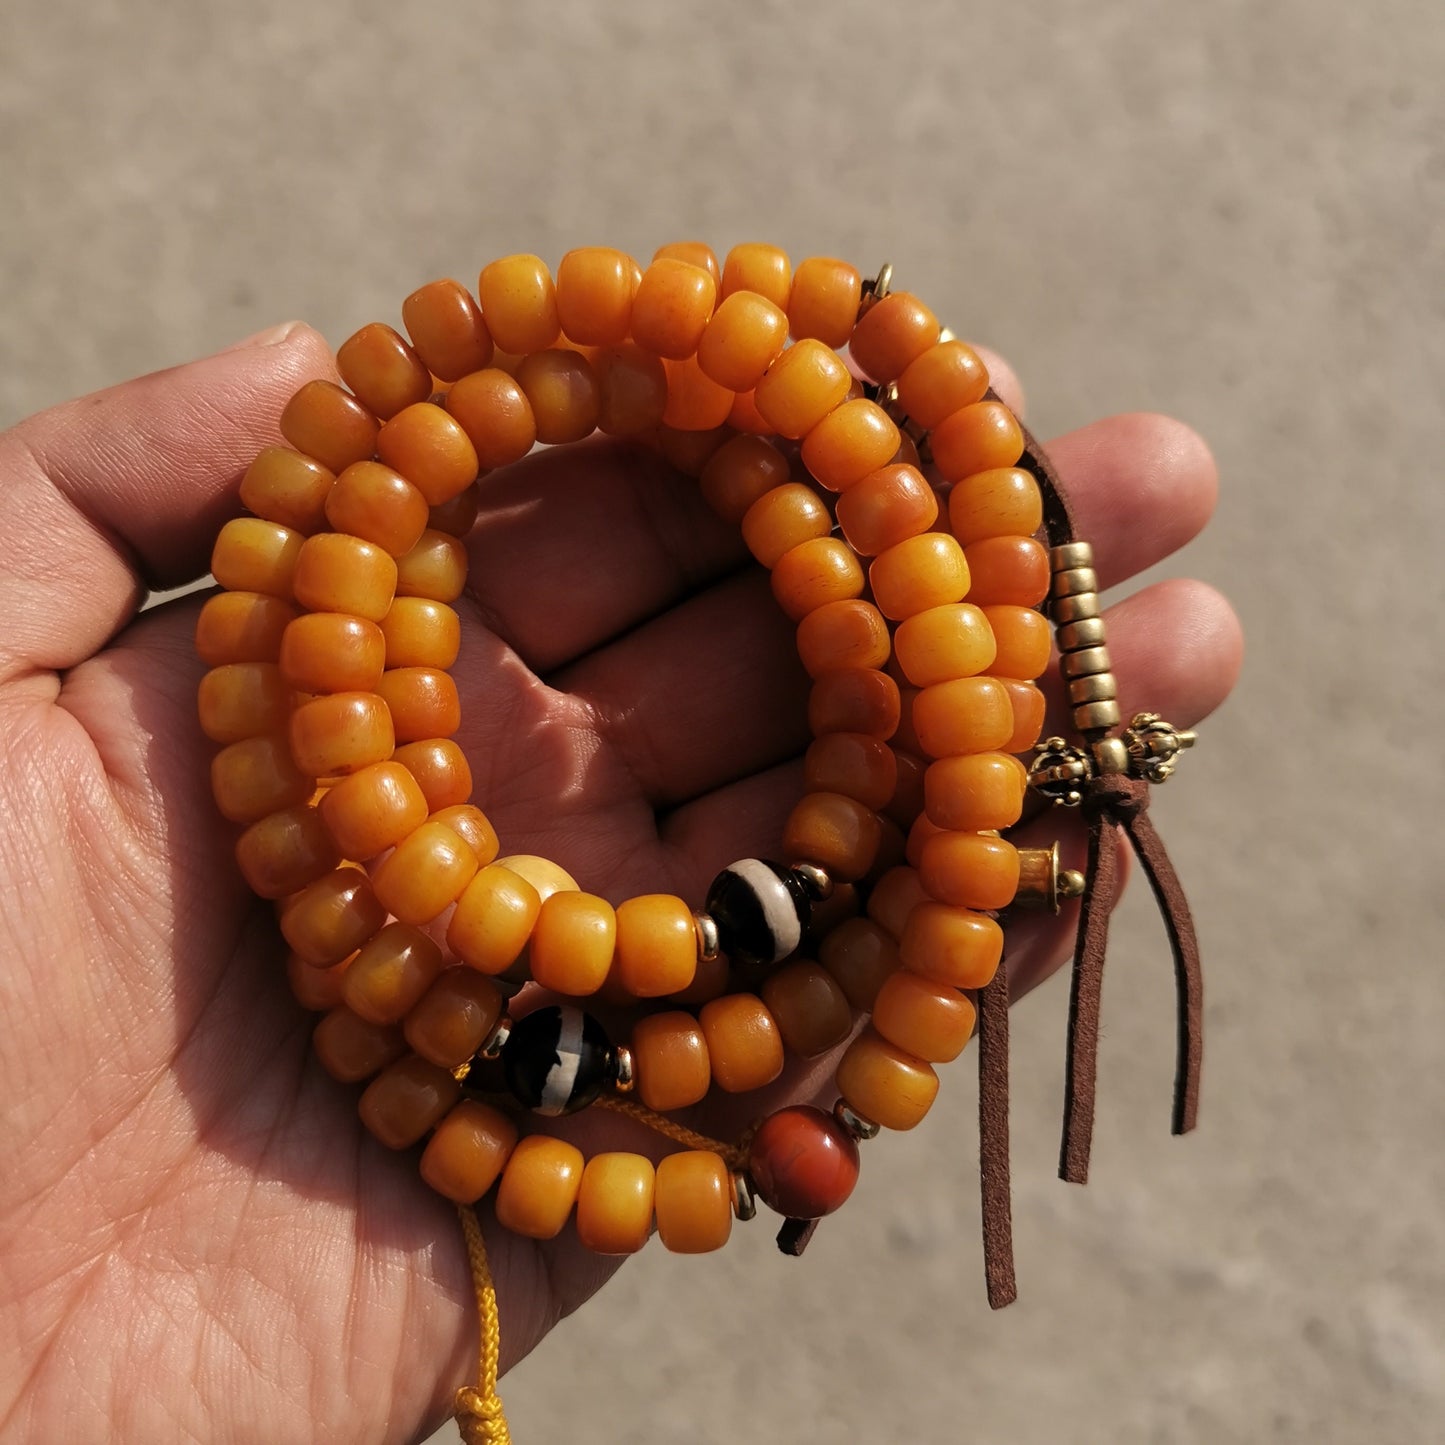 Gandhara Hand-carved Tibetan Yak Bone Mala Beads Necklace,with Copper Bead Counter,108 Beads for Meditation and Prayer